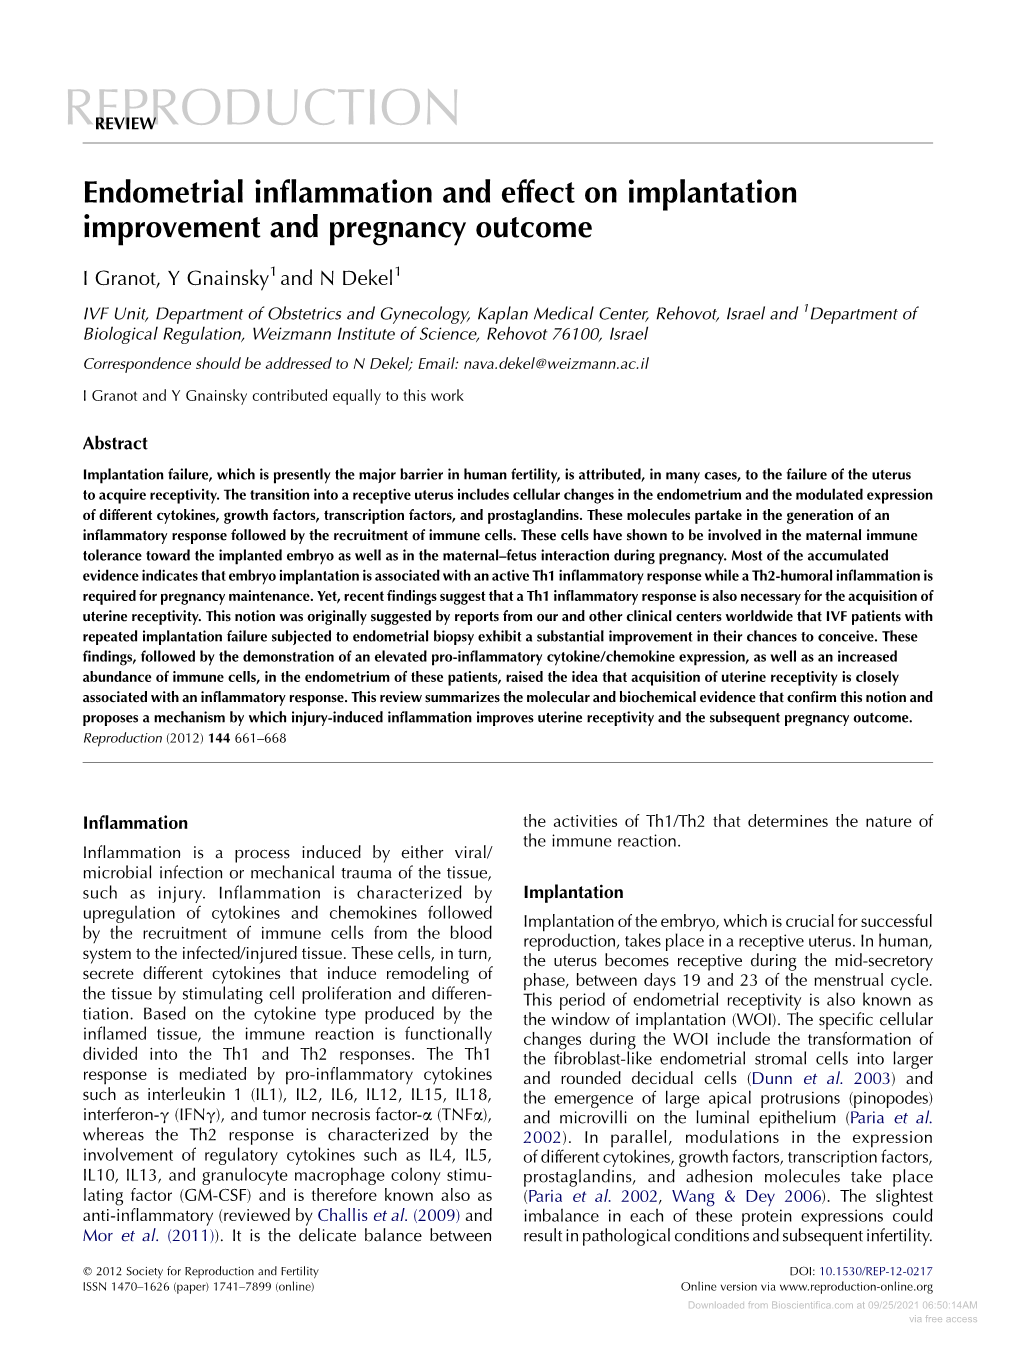 Endometrial Inflammation and Effect on Implantation Improvement And